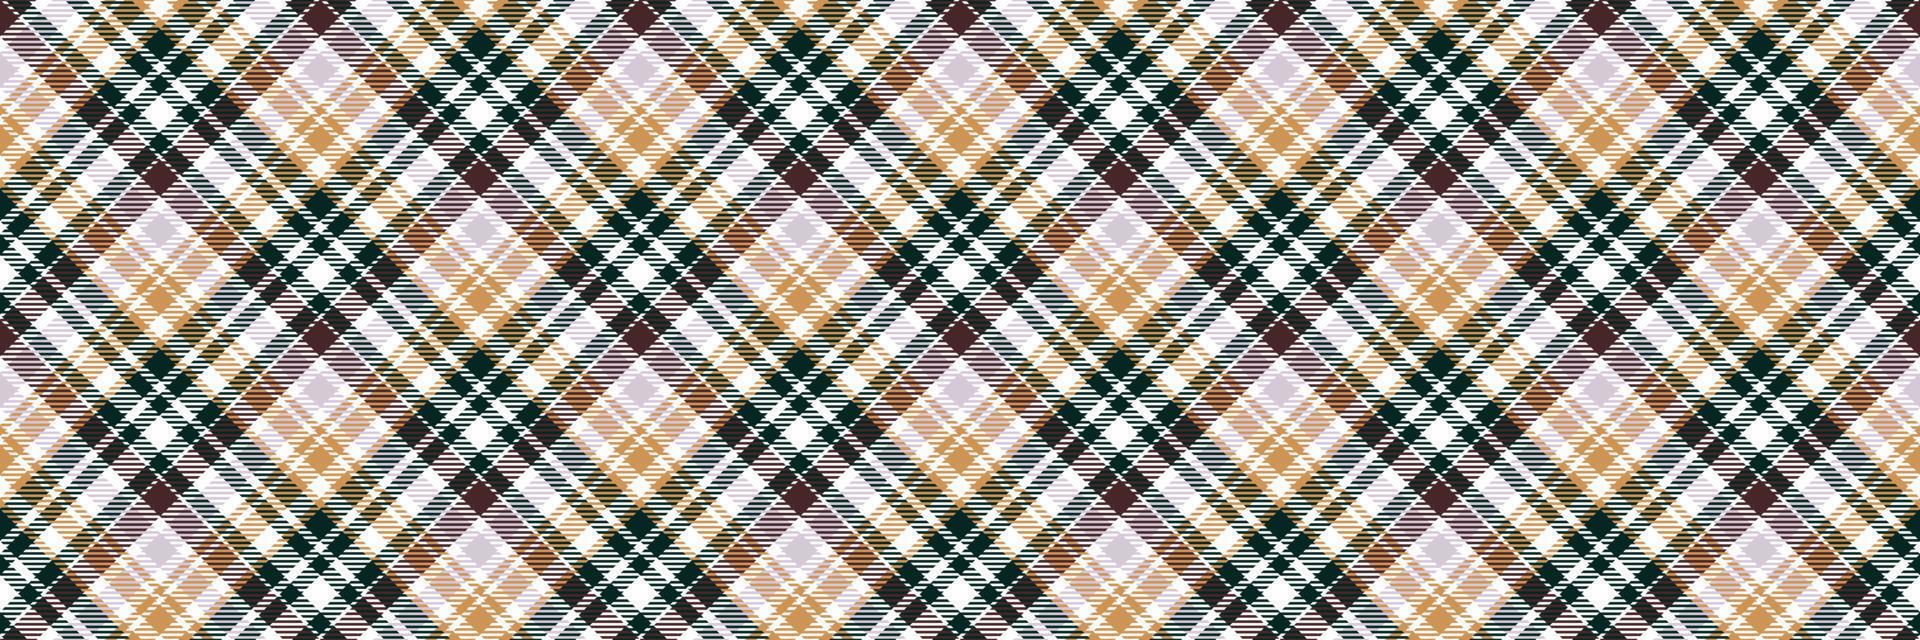 Check Simple plaid pattern seamless is a patterned cloth consisting of criss crossed, horizontal and vertical bands in multiple colours.plaid Seamless for  scarf,pyjamas,blanket,duvet,kilt large vector